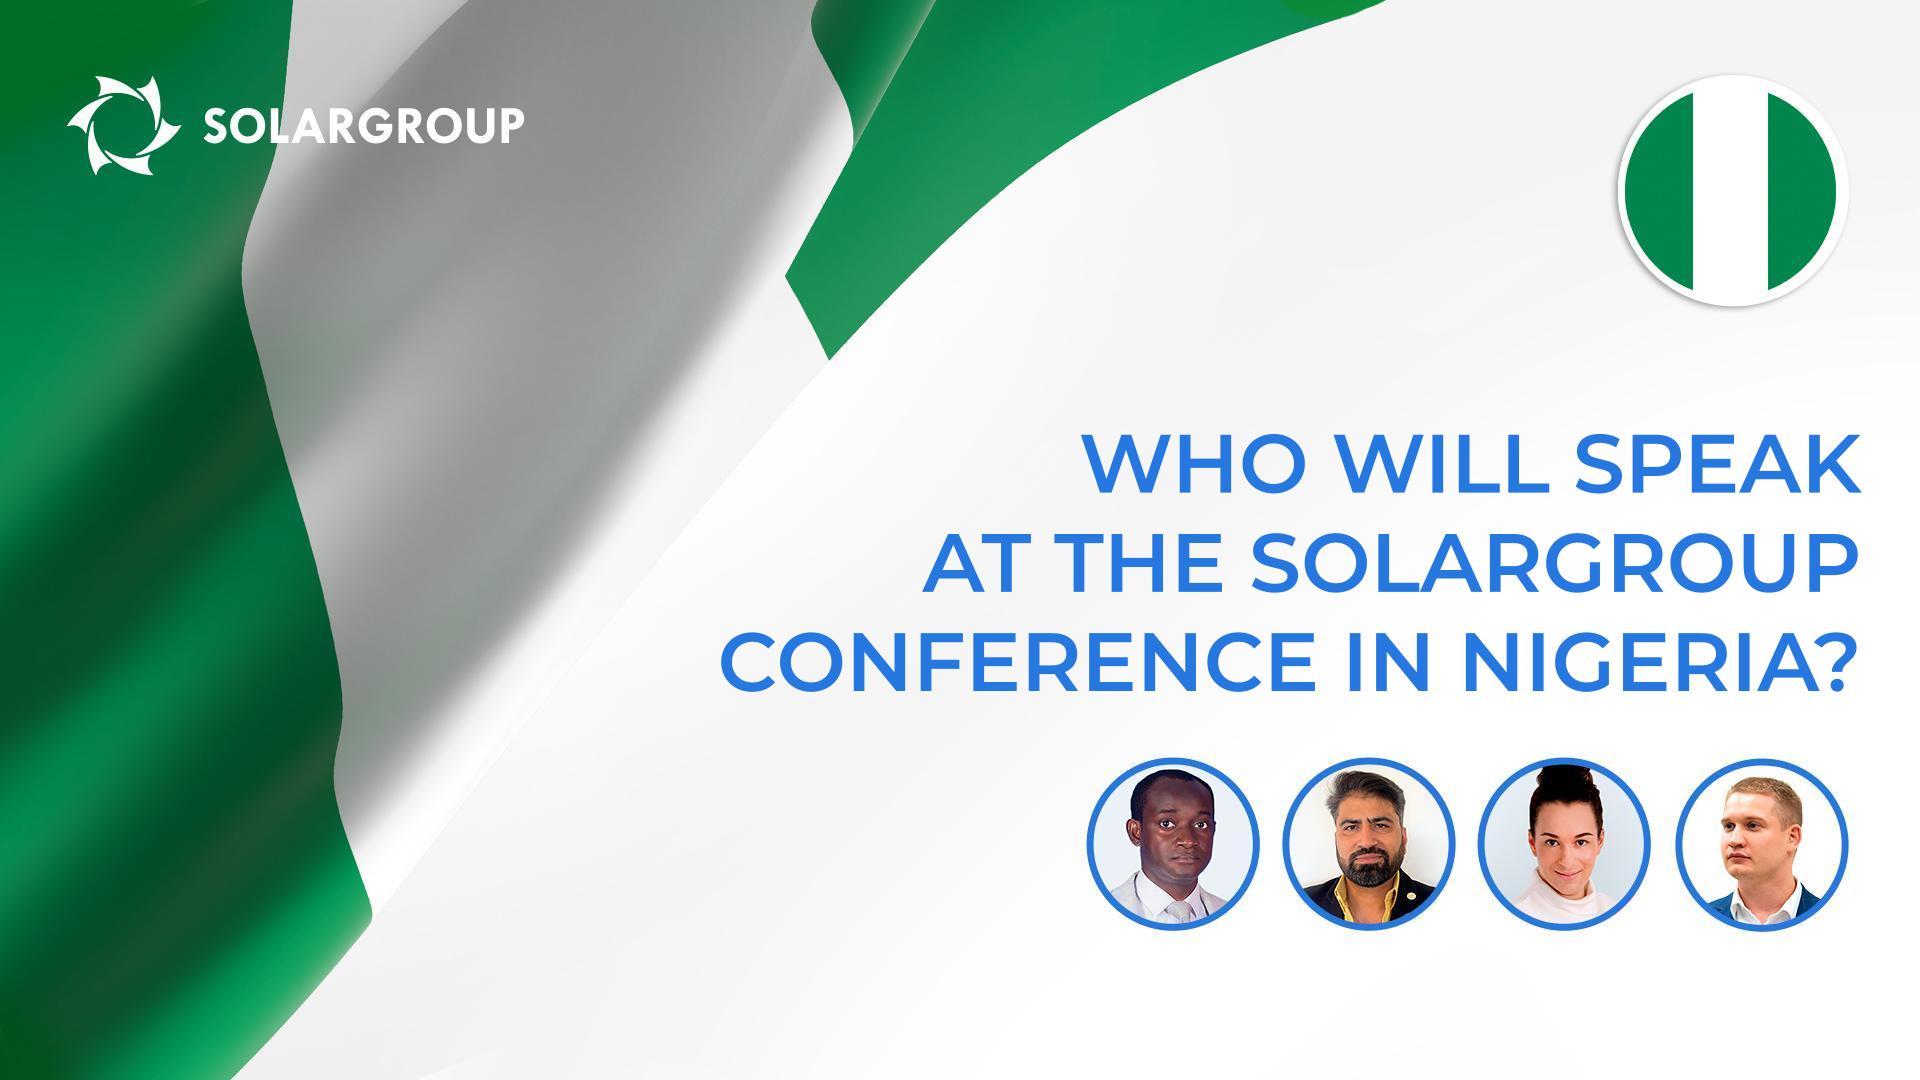 Who will speak at the SOLARGROUP conference in Nigeria?